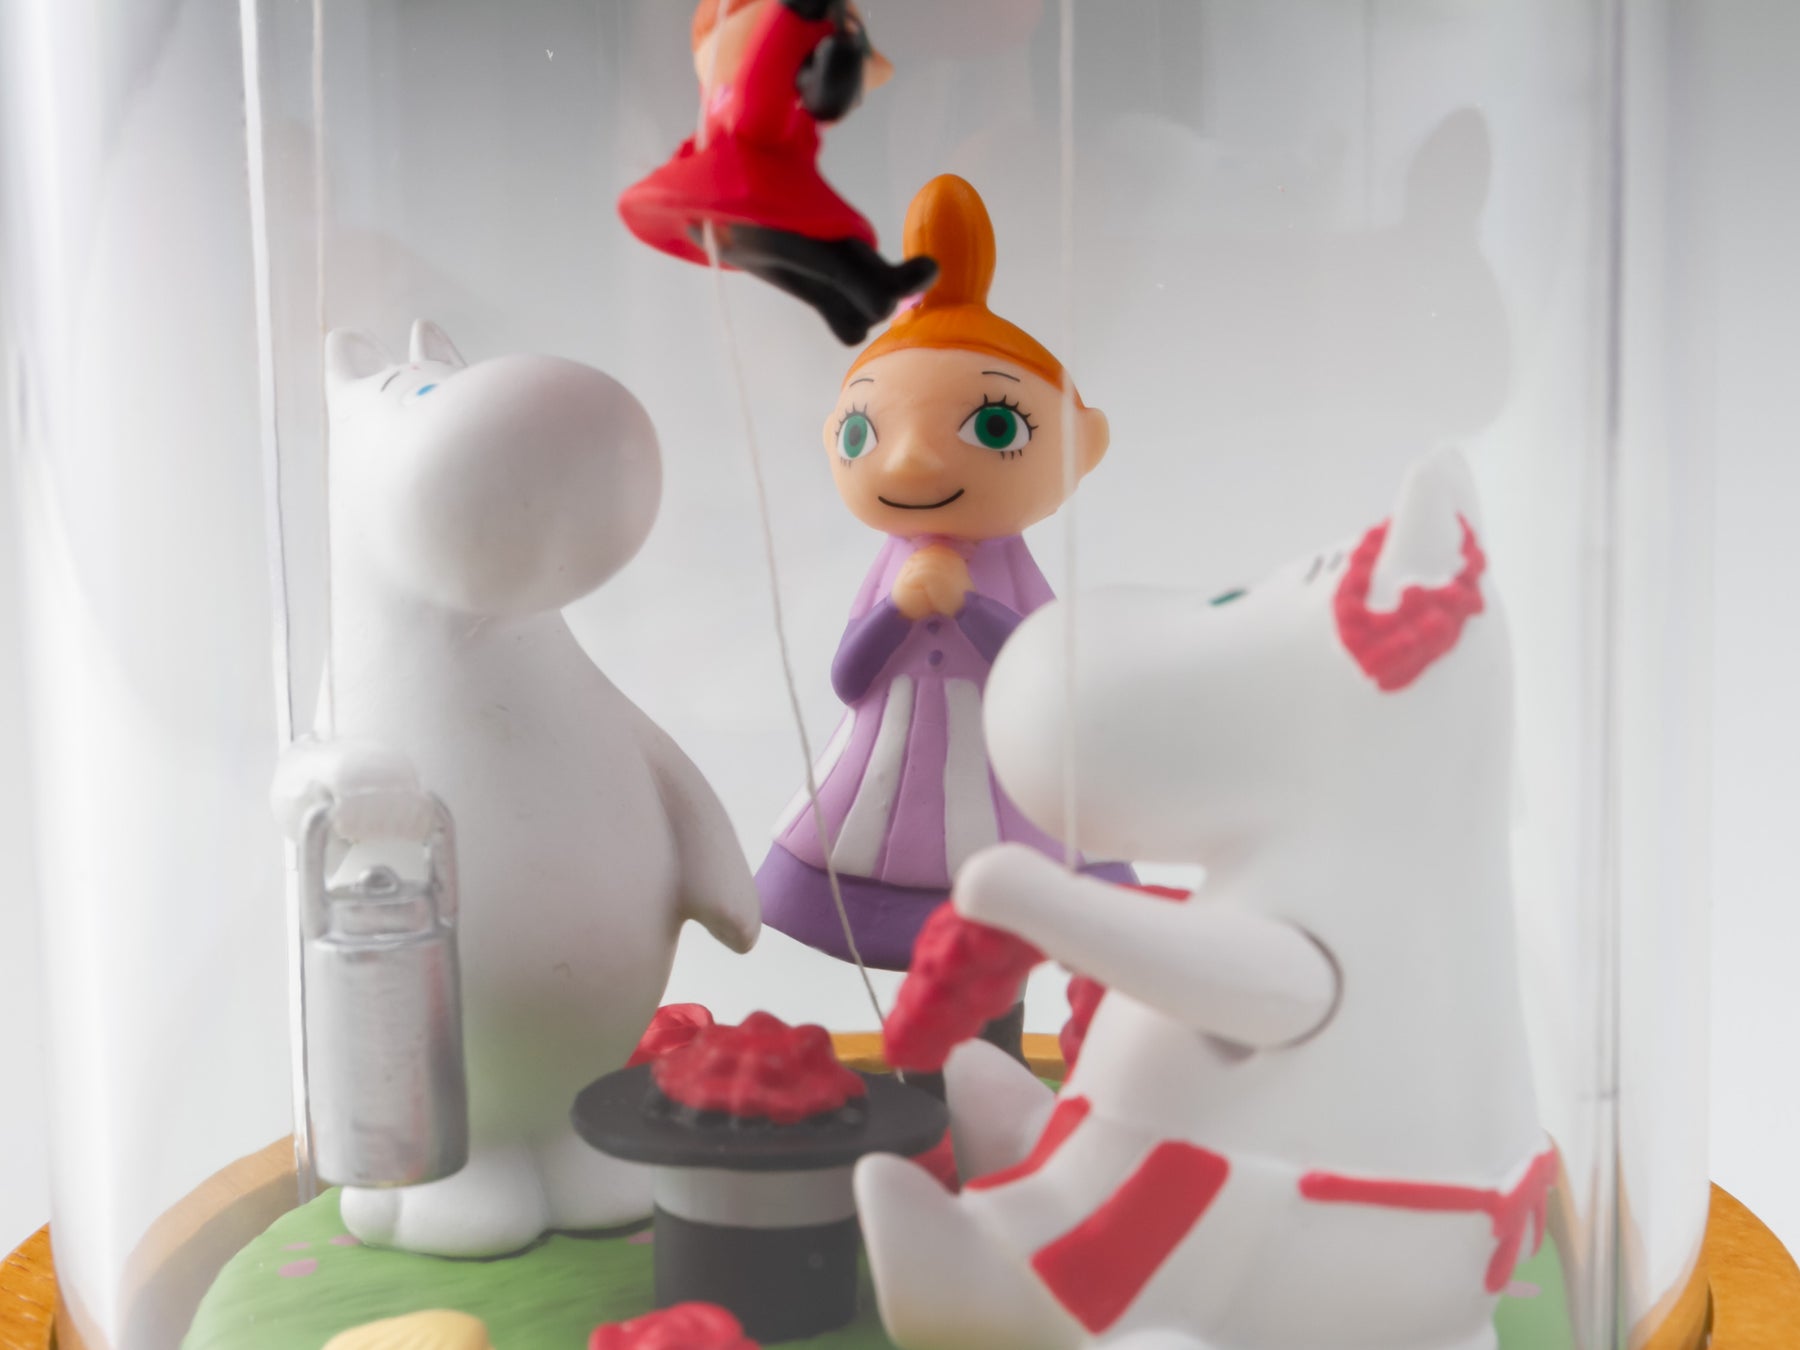 Moomin Limited Edition Marionette Music Box – Shinise